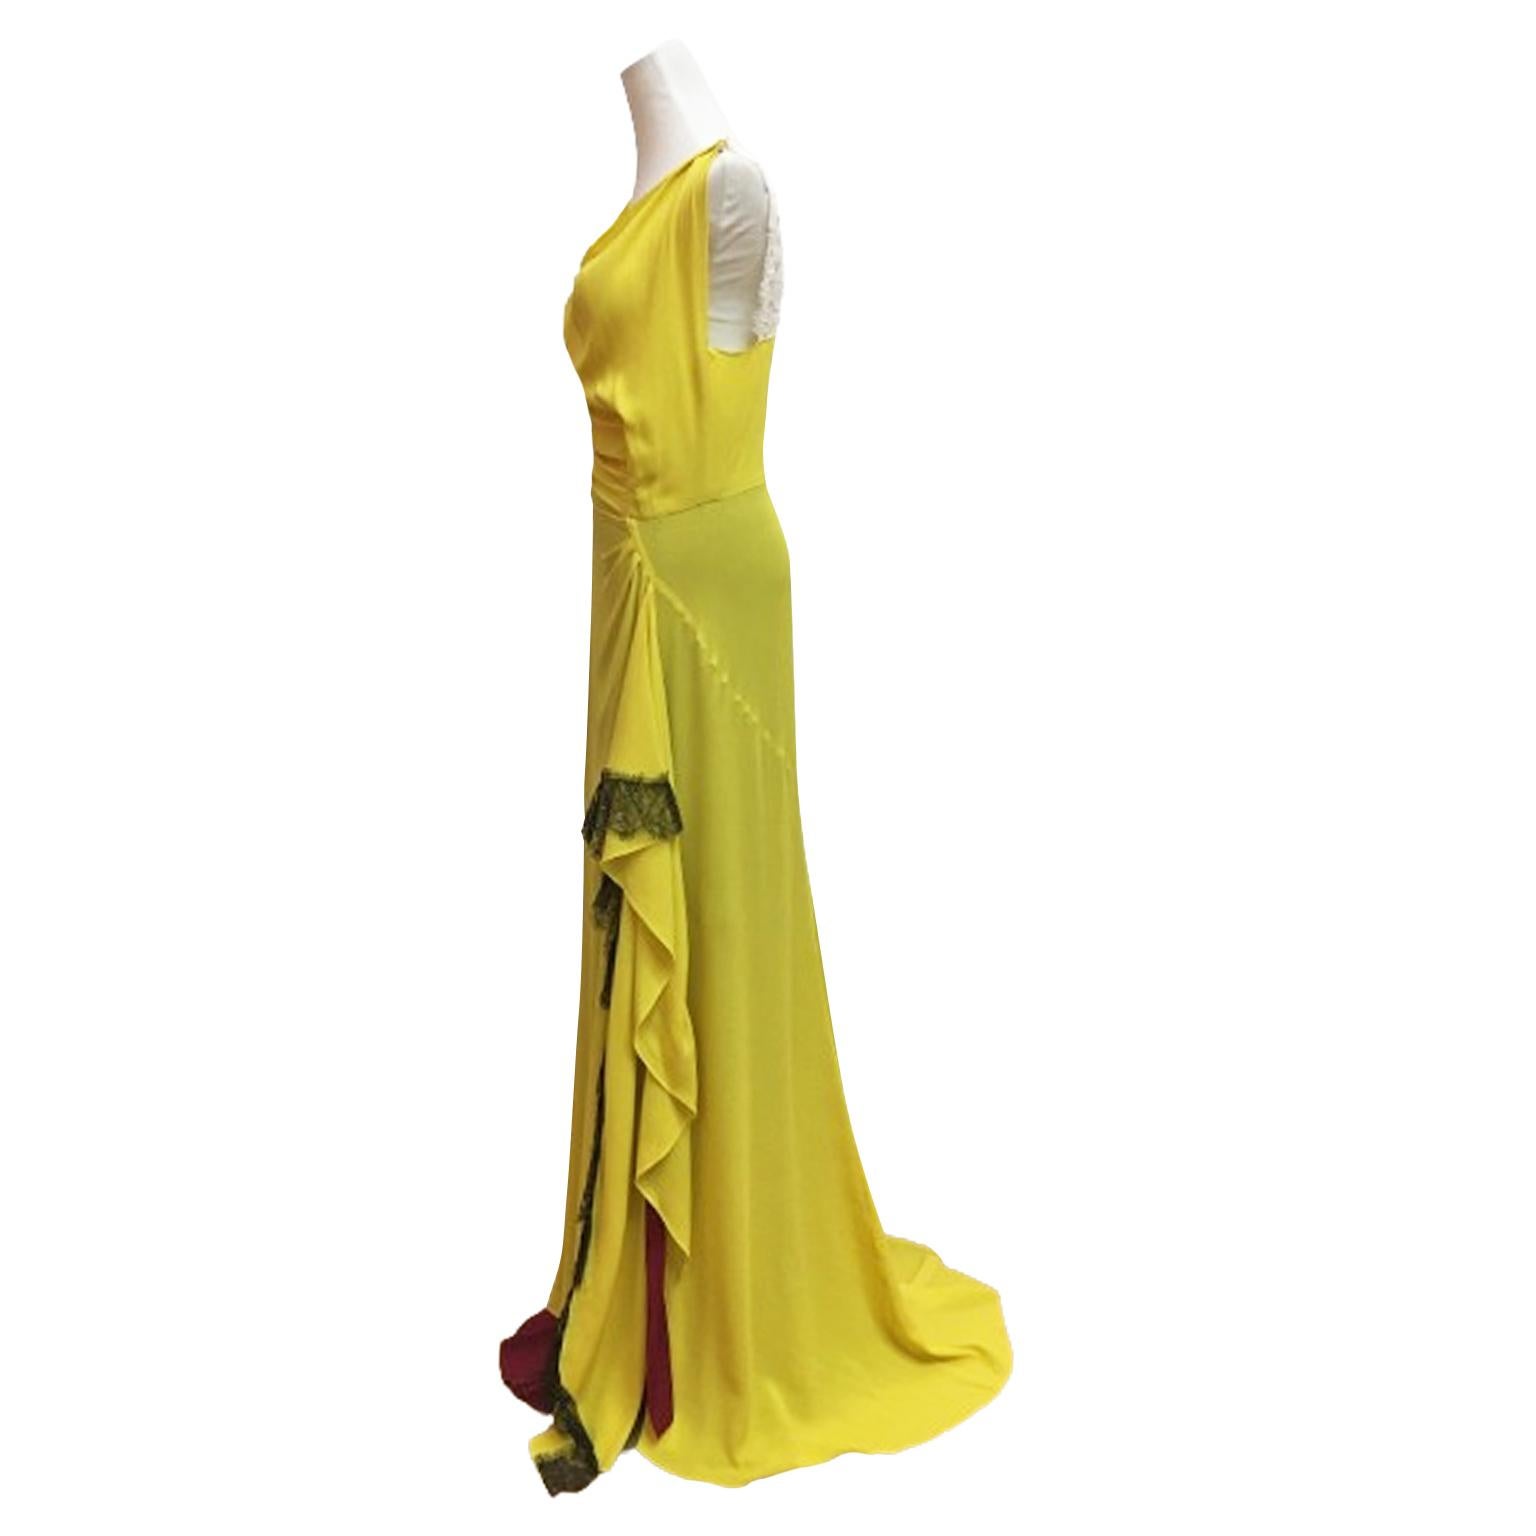 Women's Nina Ricci Olivier Theyskens Sample Dress Gown Yellow Black Lace circa 2010 For Sale